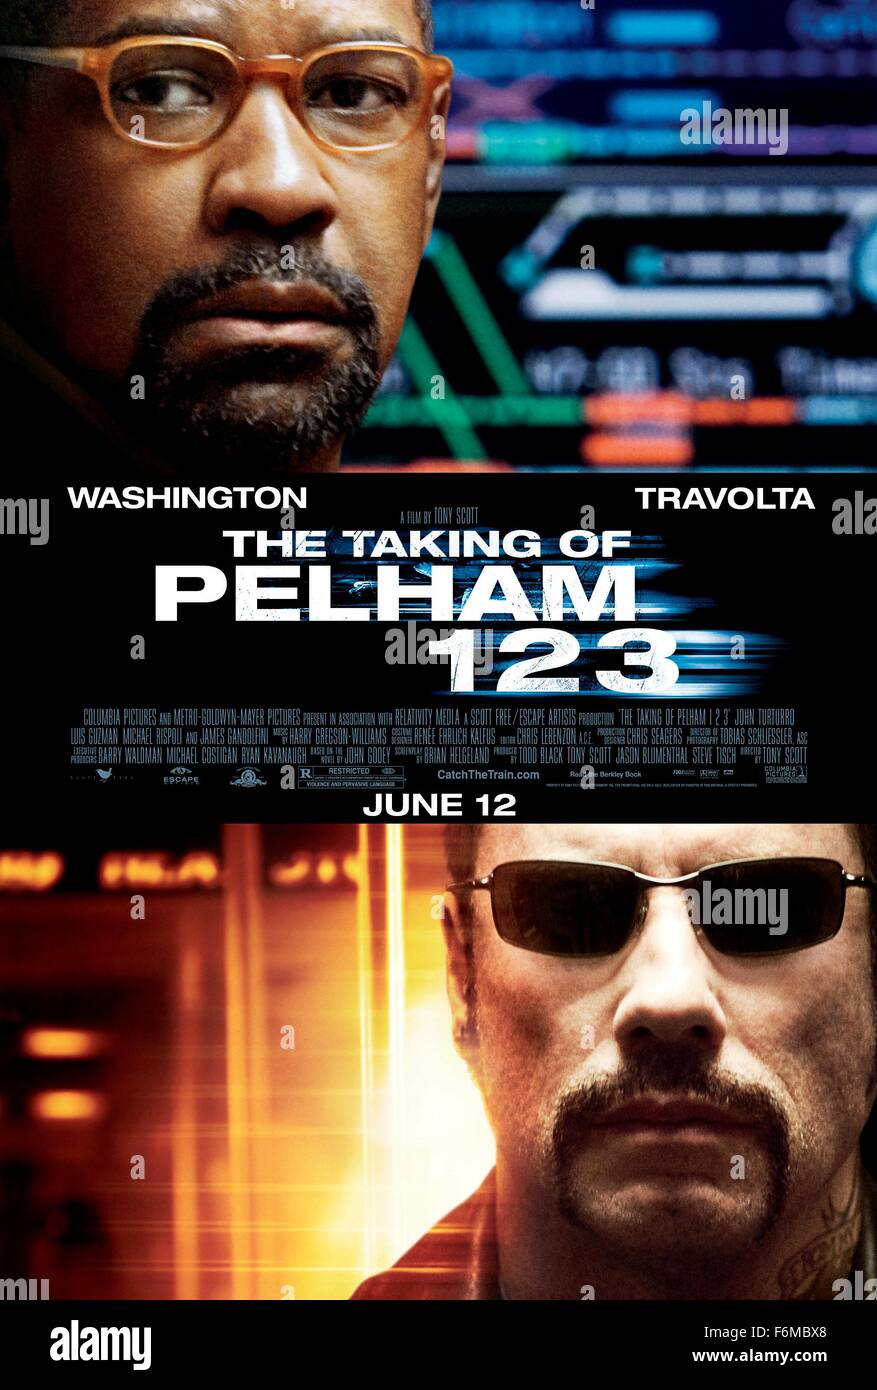 RELEASE DATE: June 12, 2009. MOVIE TITLE: Taking of the Pelham 1-2-3 aka Taking of the Pelham 123. STUDIO: Columbia Pictures. PLOT: Armed men hijack a New York subway train in demand of a hefty ransom. As the authorities try to negotiate with the hostage takers they wonder how the hijackers plan to get away. PICTURED: DENZEL WASHINGTON as Lieutenant Zachary Garber and JOHN TRAVOLTA as Ryder.. Stock Photo